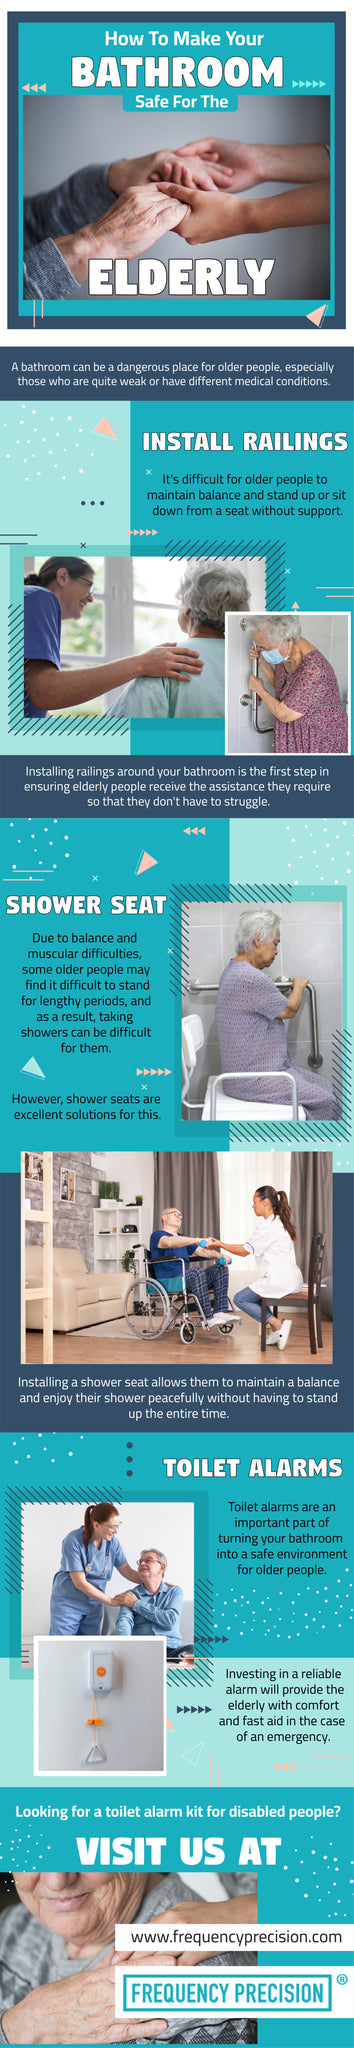 How To Make Your Bathroom Safe For The Elderly